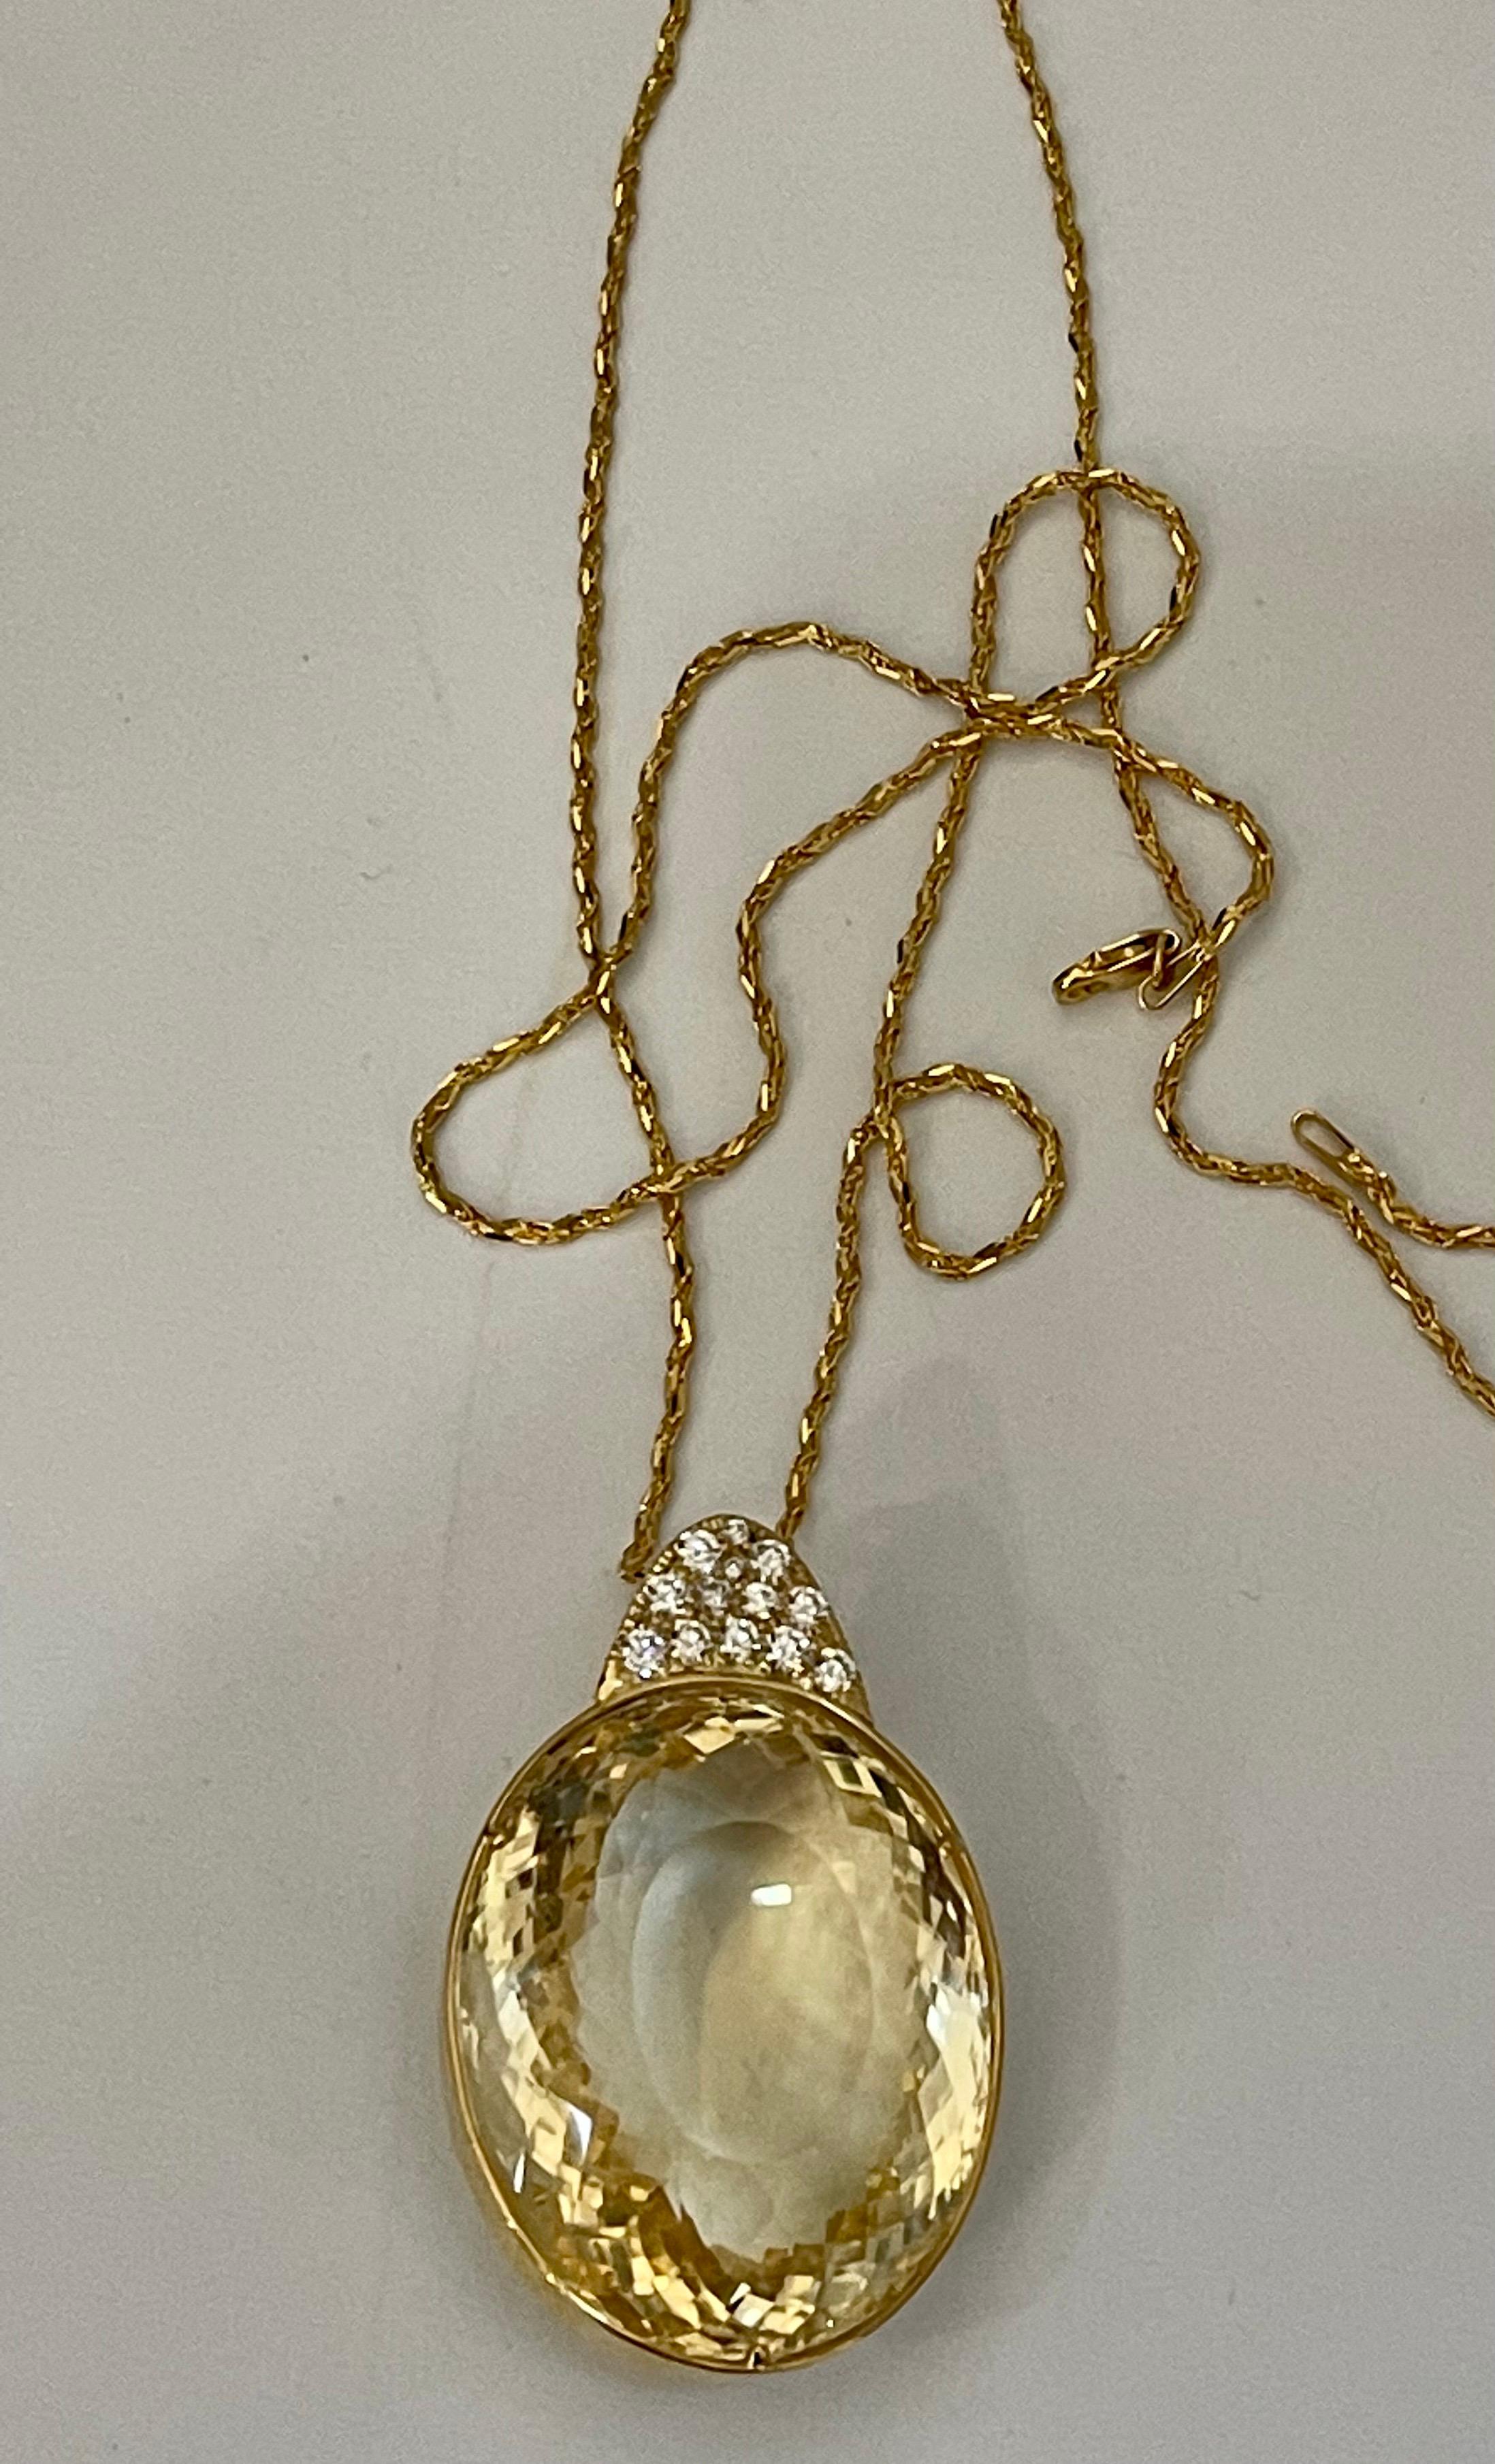 125 Carat Citrine & Diamond Pendent or Necklace 14 Karat Yellow Gold with Chain For Sale 1